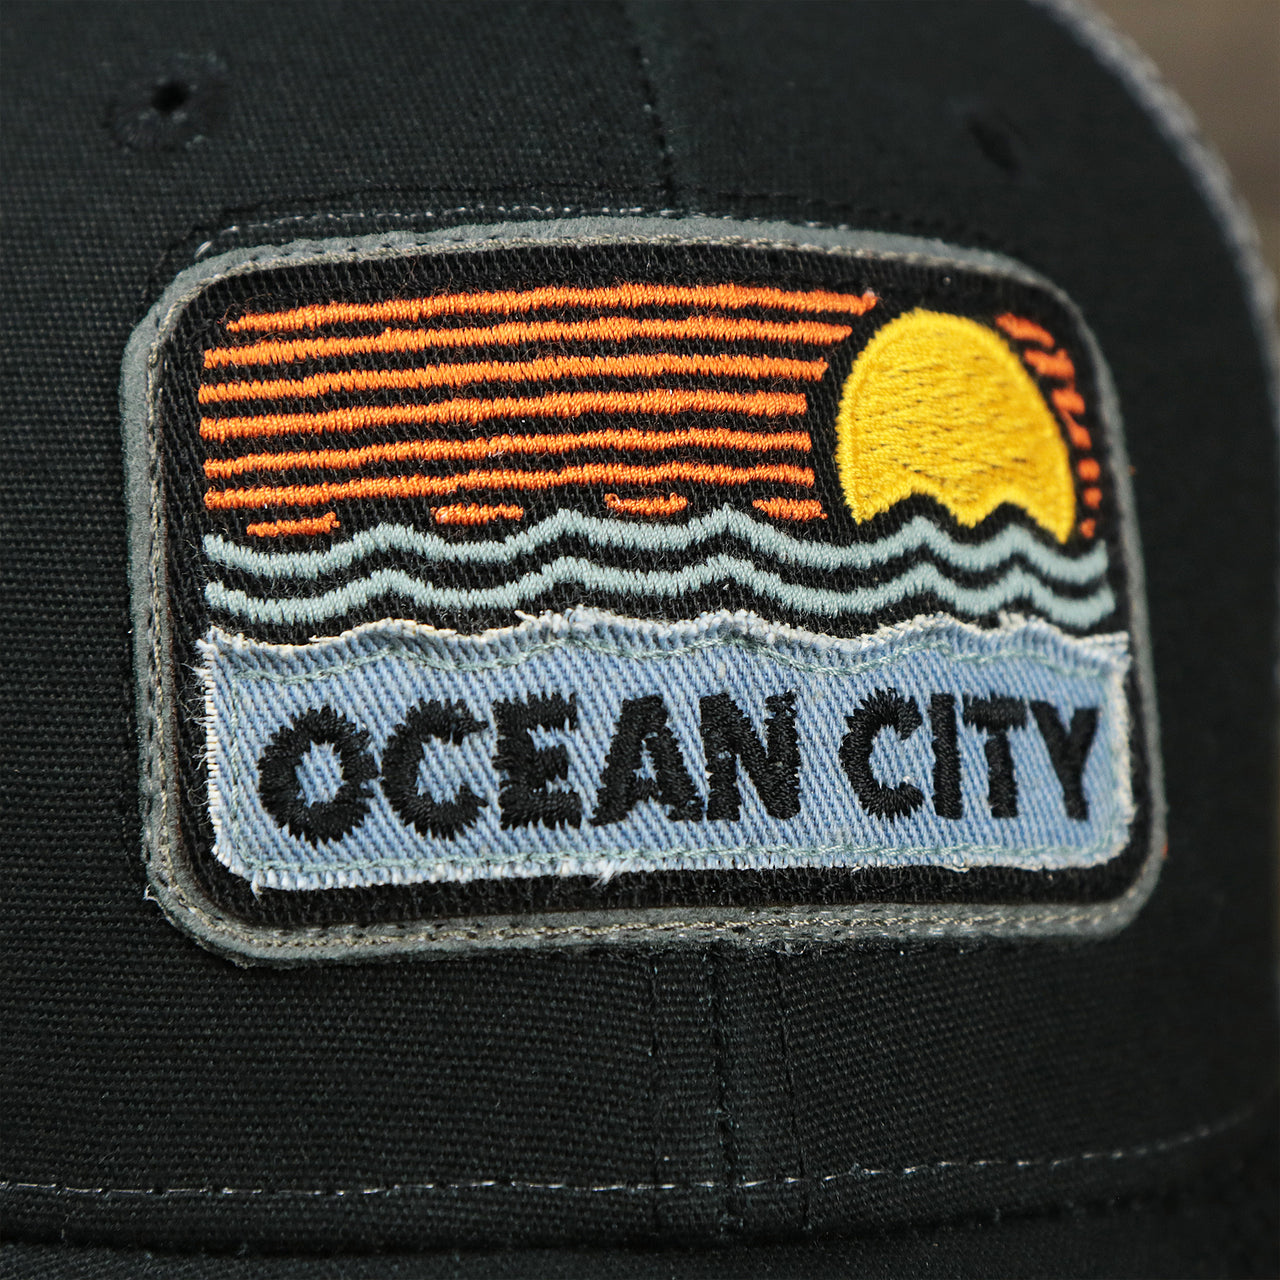 The Ocean City Sunset Patch on the Youth New Jersey Ocean City Sunset Mesh Back Trucker Hat | Black And Grey Mesh Youth Trucker Hat